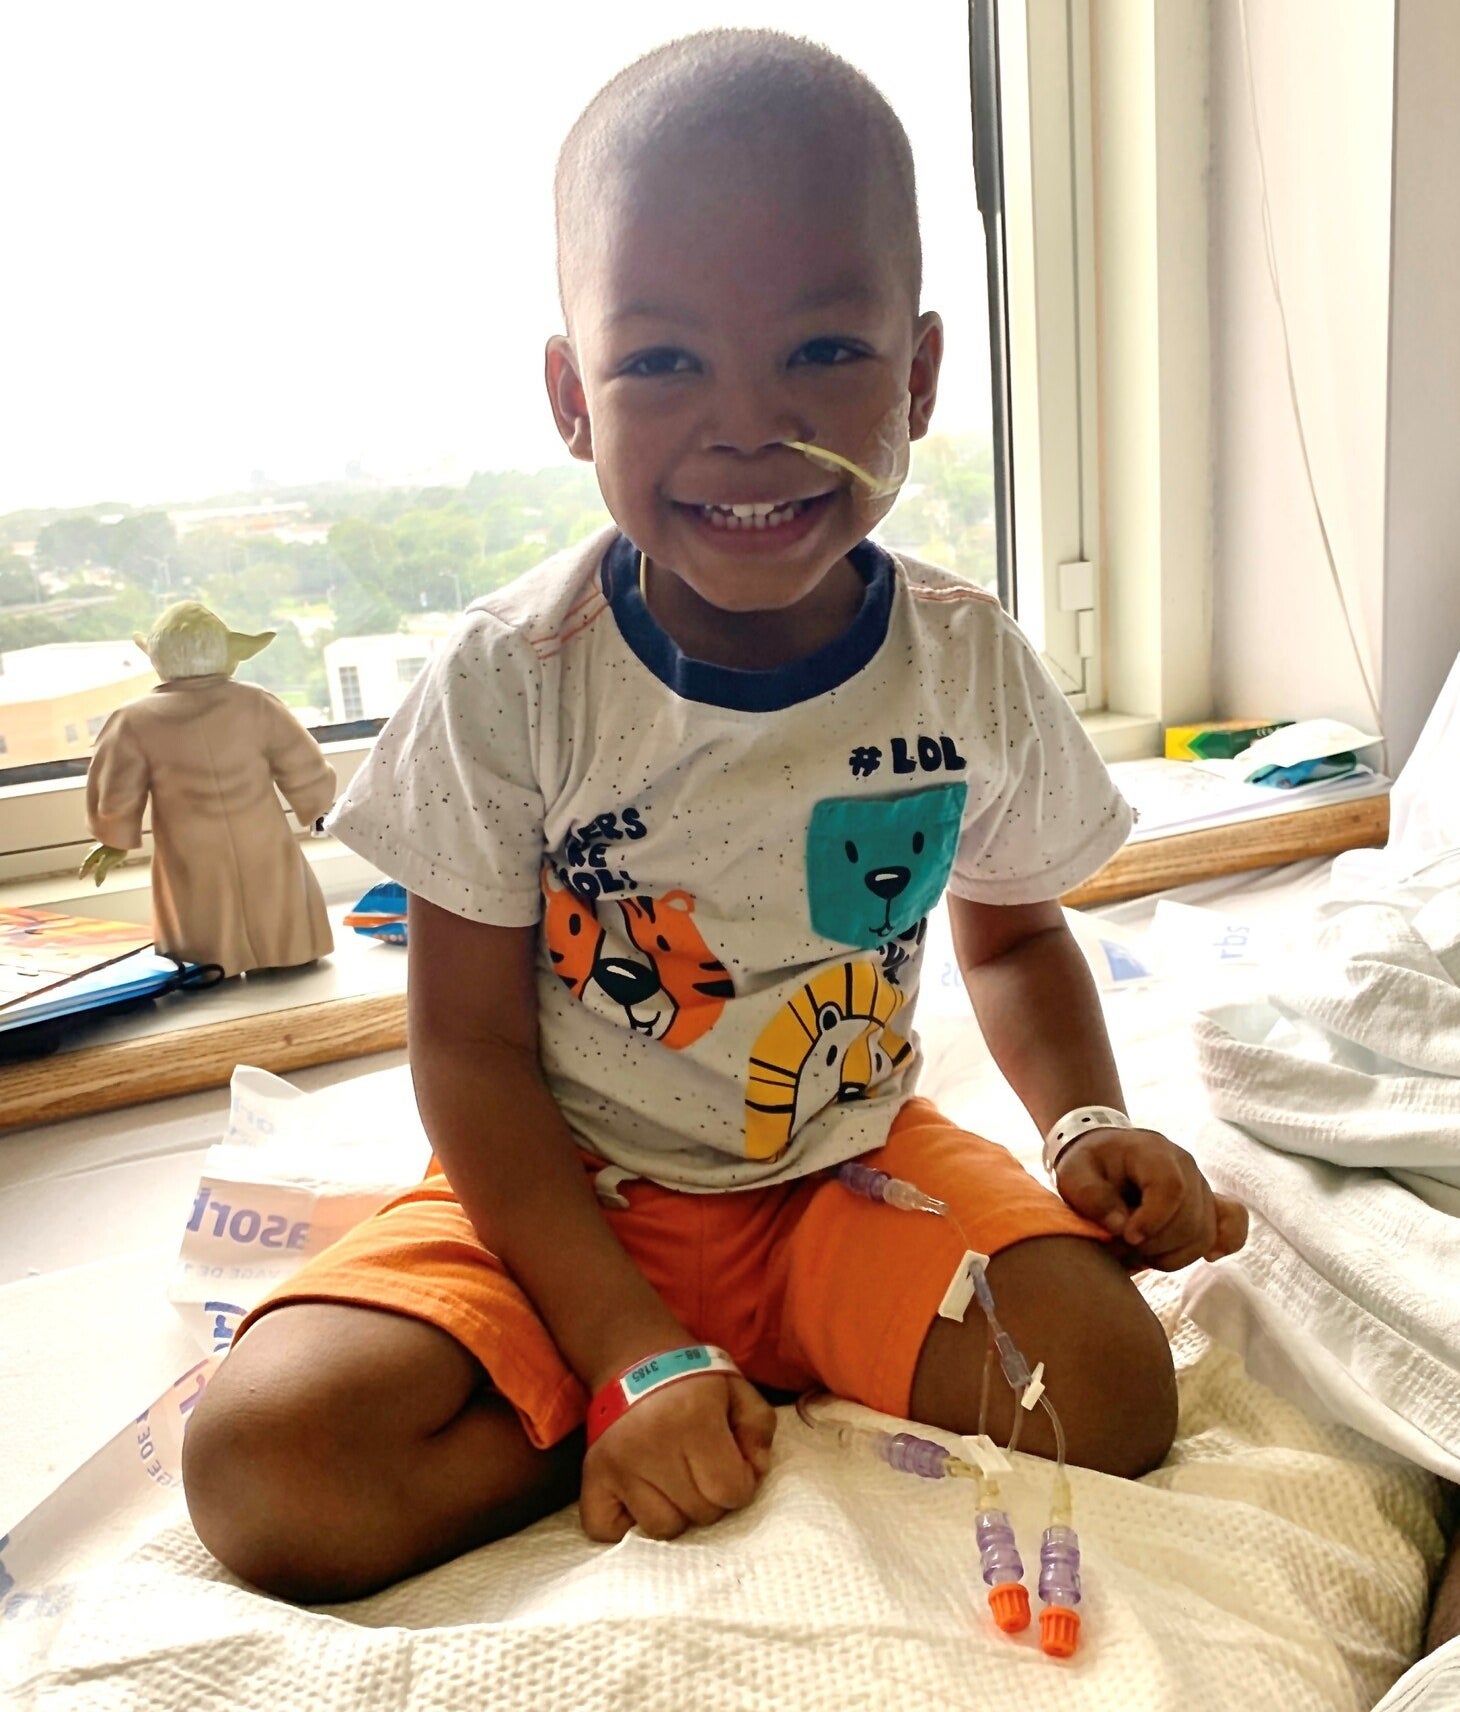 A young boy sits upright in a hospital bed, smiling